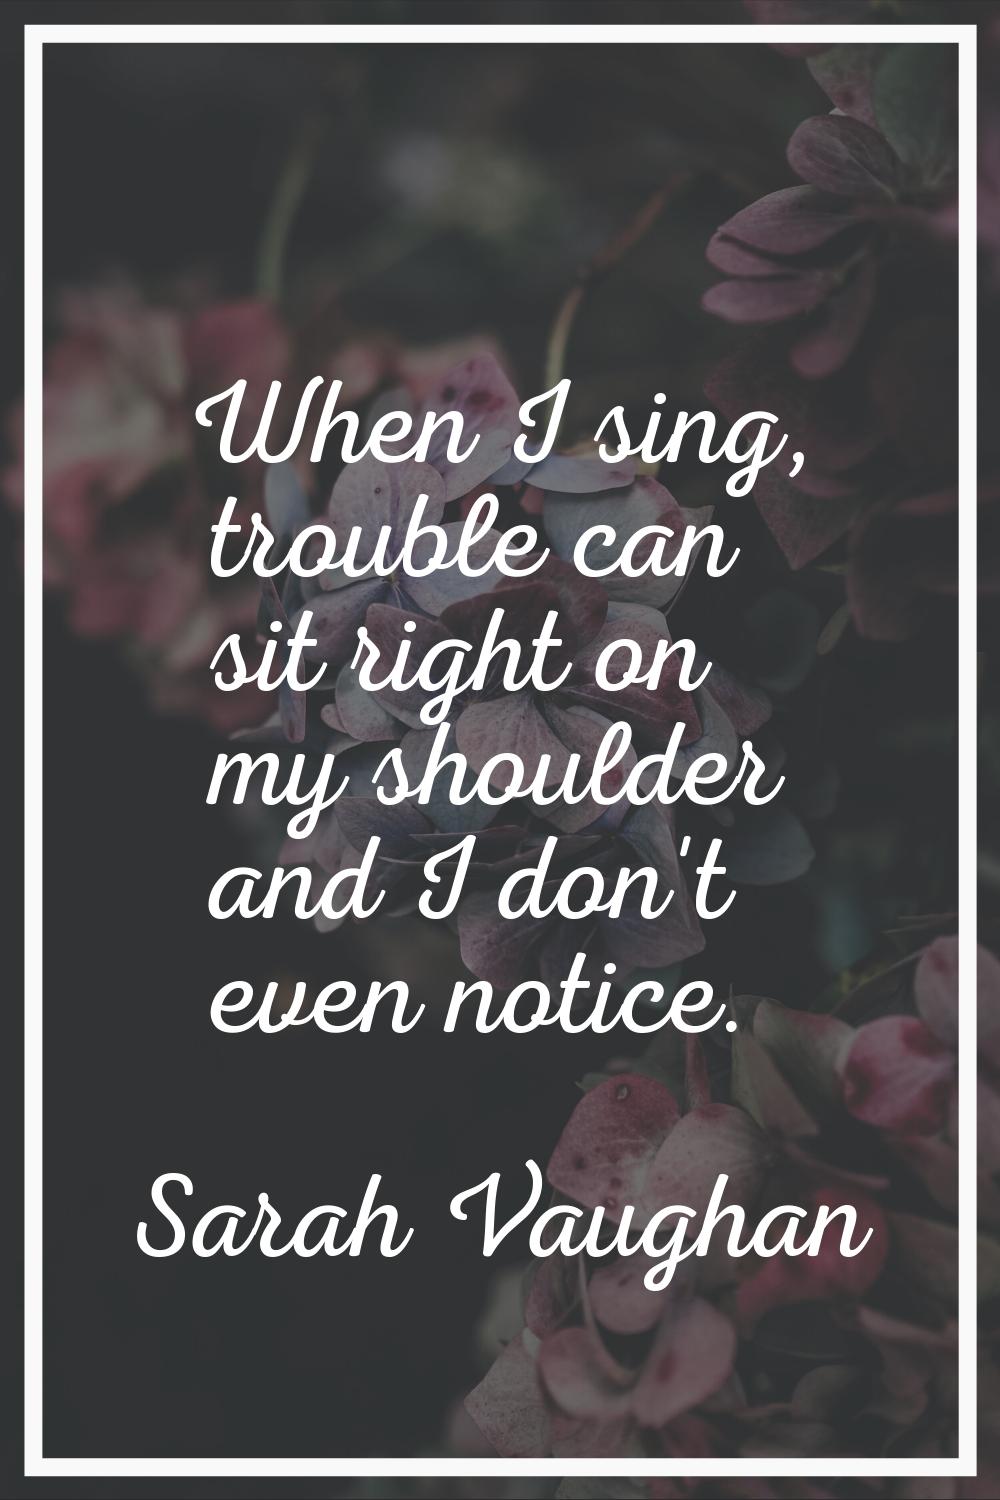 When I sing, trouble can sit right on my shoulder and I don't even notice.